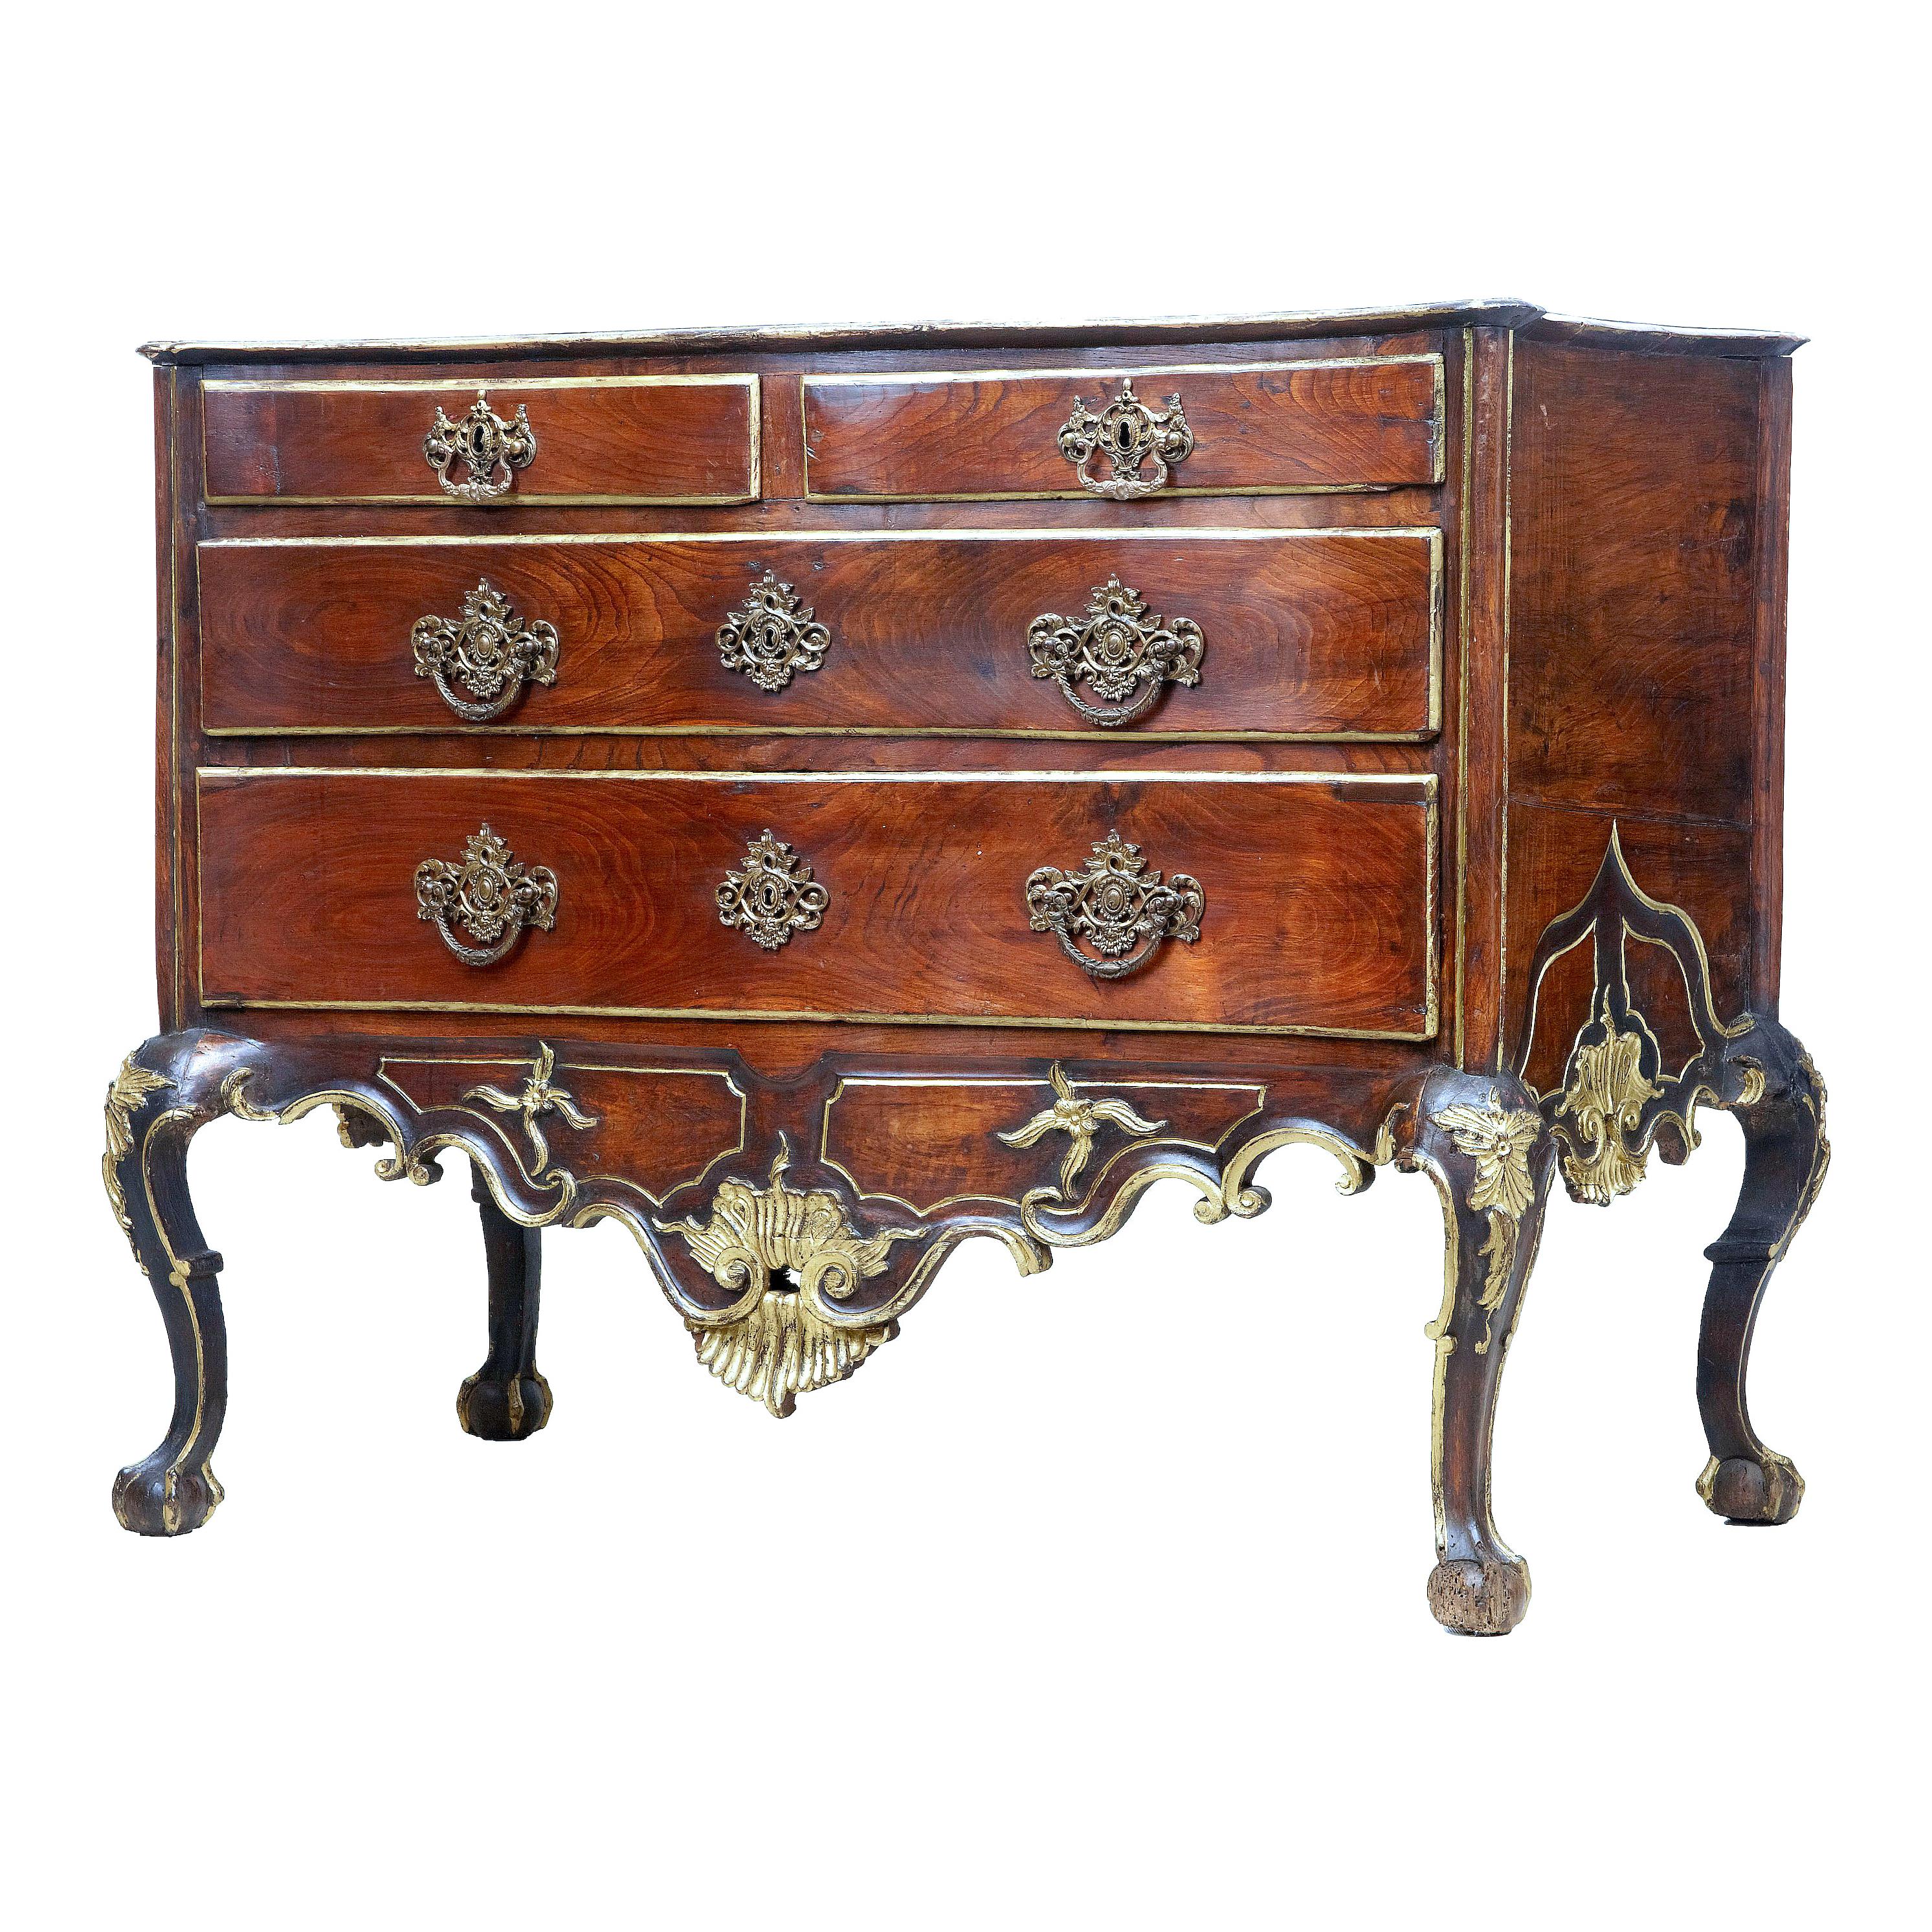 18th Century Portuguese Carved Walnut and Gilt Commode